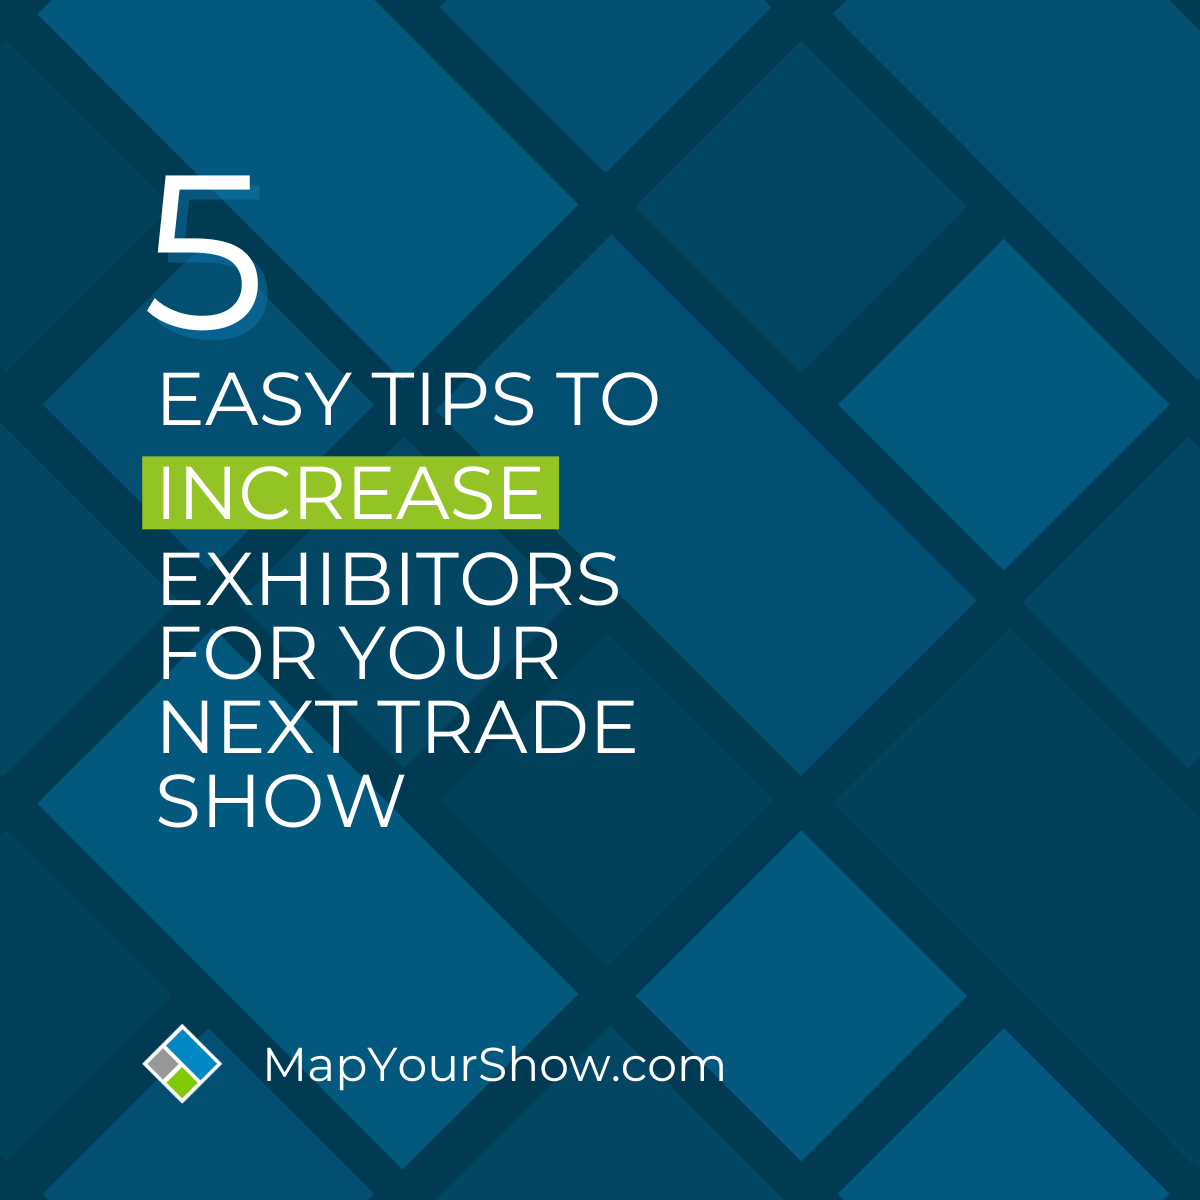 5 Easy Tips to Increase Exhibitors for Your Next Trade Show. By Brett Glatfelter, Vice President of Exhibitor Engagement at Map Your Show